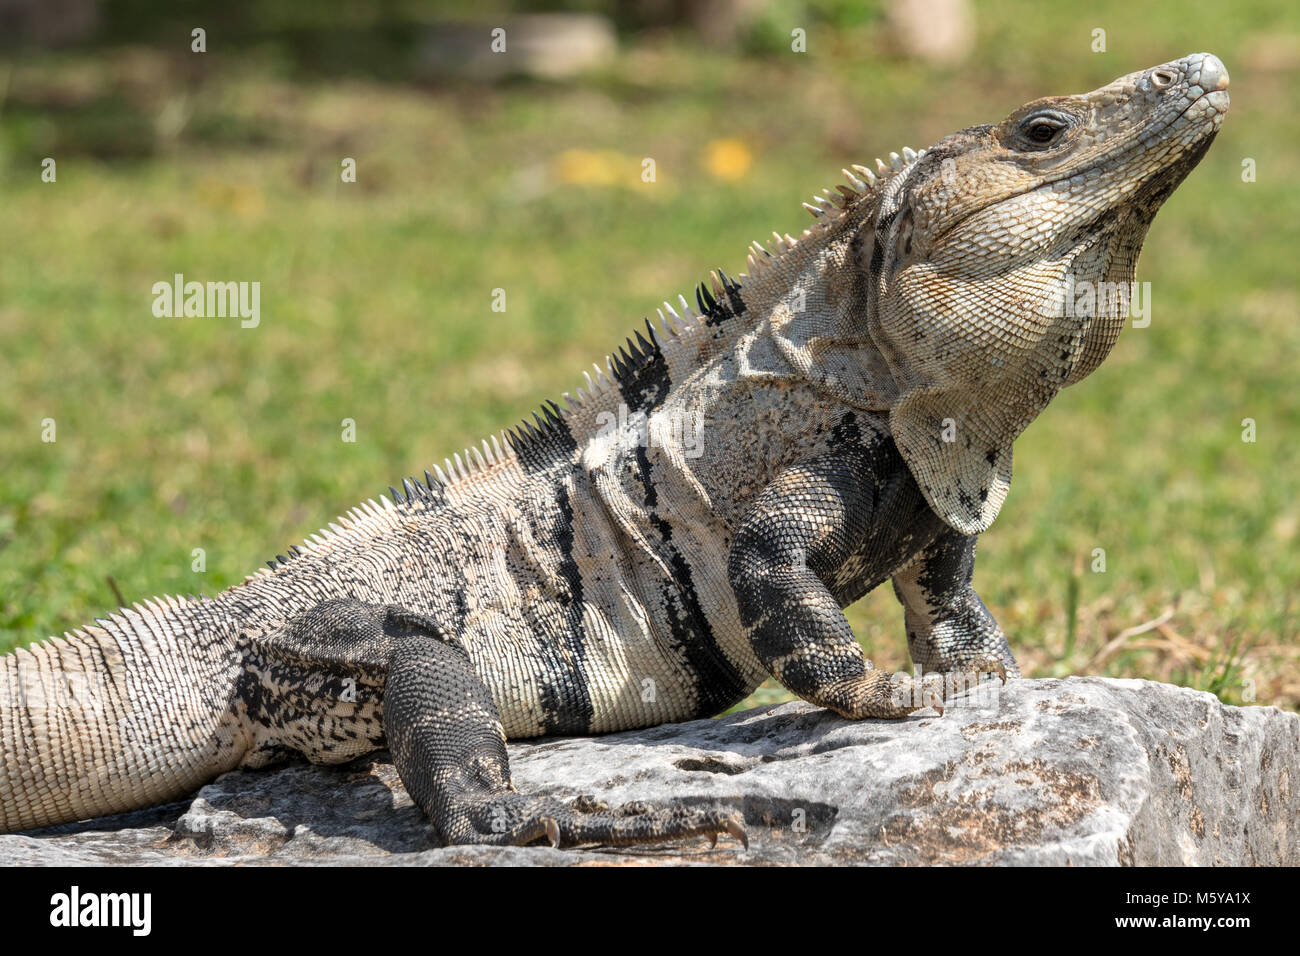 Tulum, Mexico, 20 Feb 2018. A spinytail iguana (Ctenosaurs) is seen in the Mayan ruins of Tulum in Mexico. Enrique Shore/Alamy Stock Photo Stock Photo